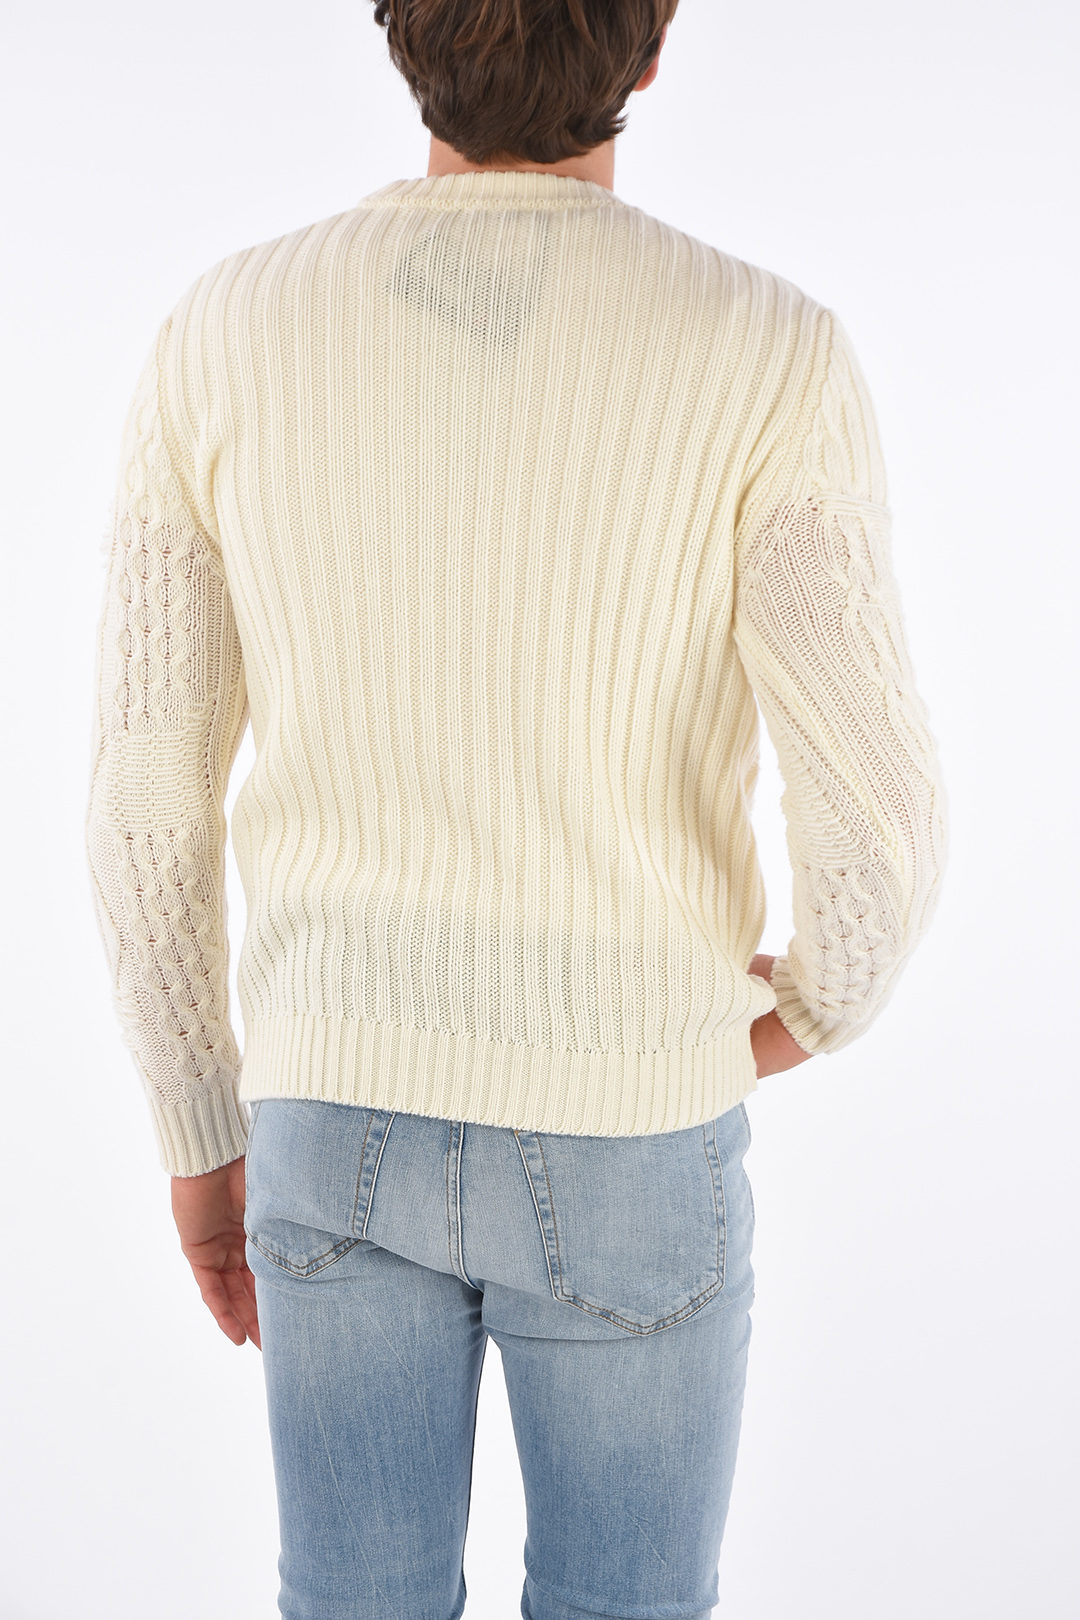 Diesel Distressed K-BRIGLY Crew-Neck Sweater men - Glamood Outlet